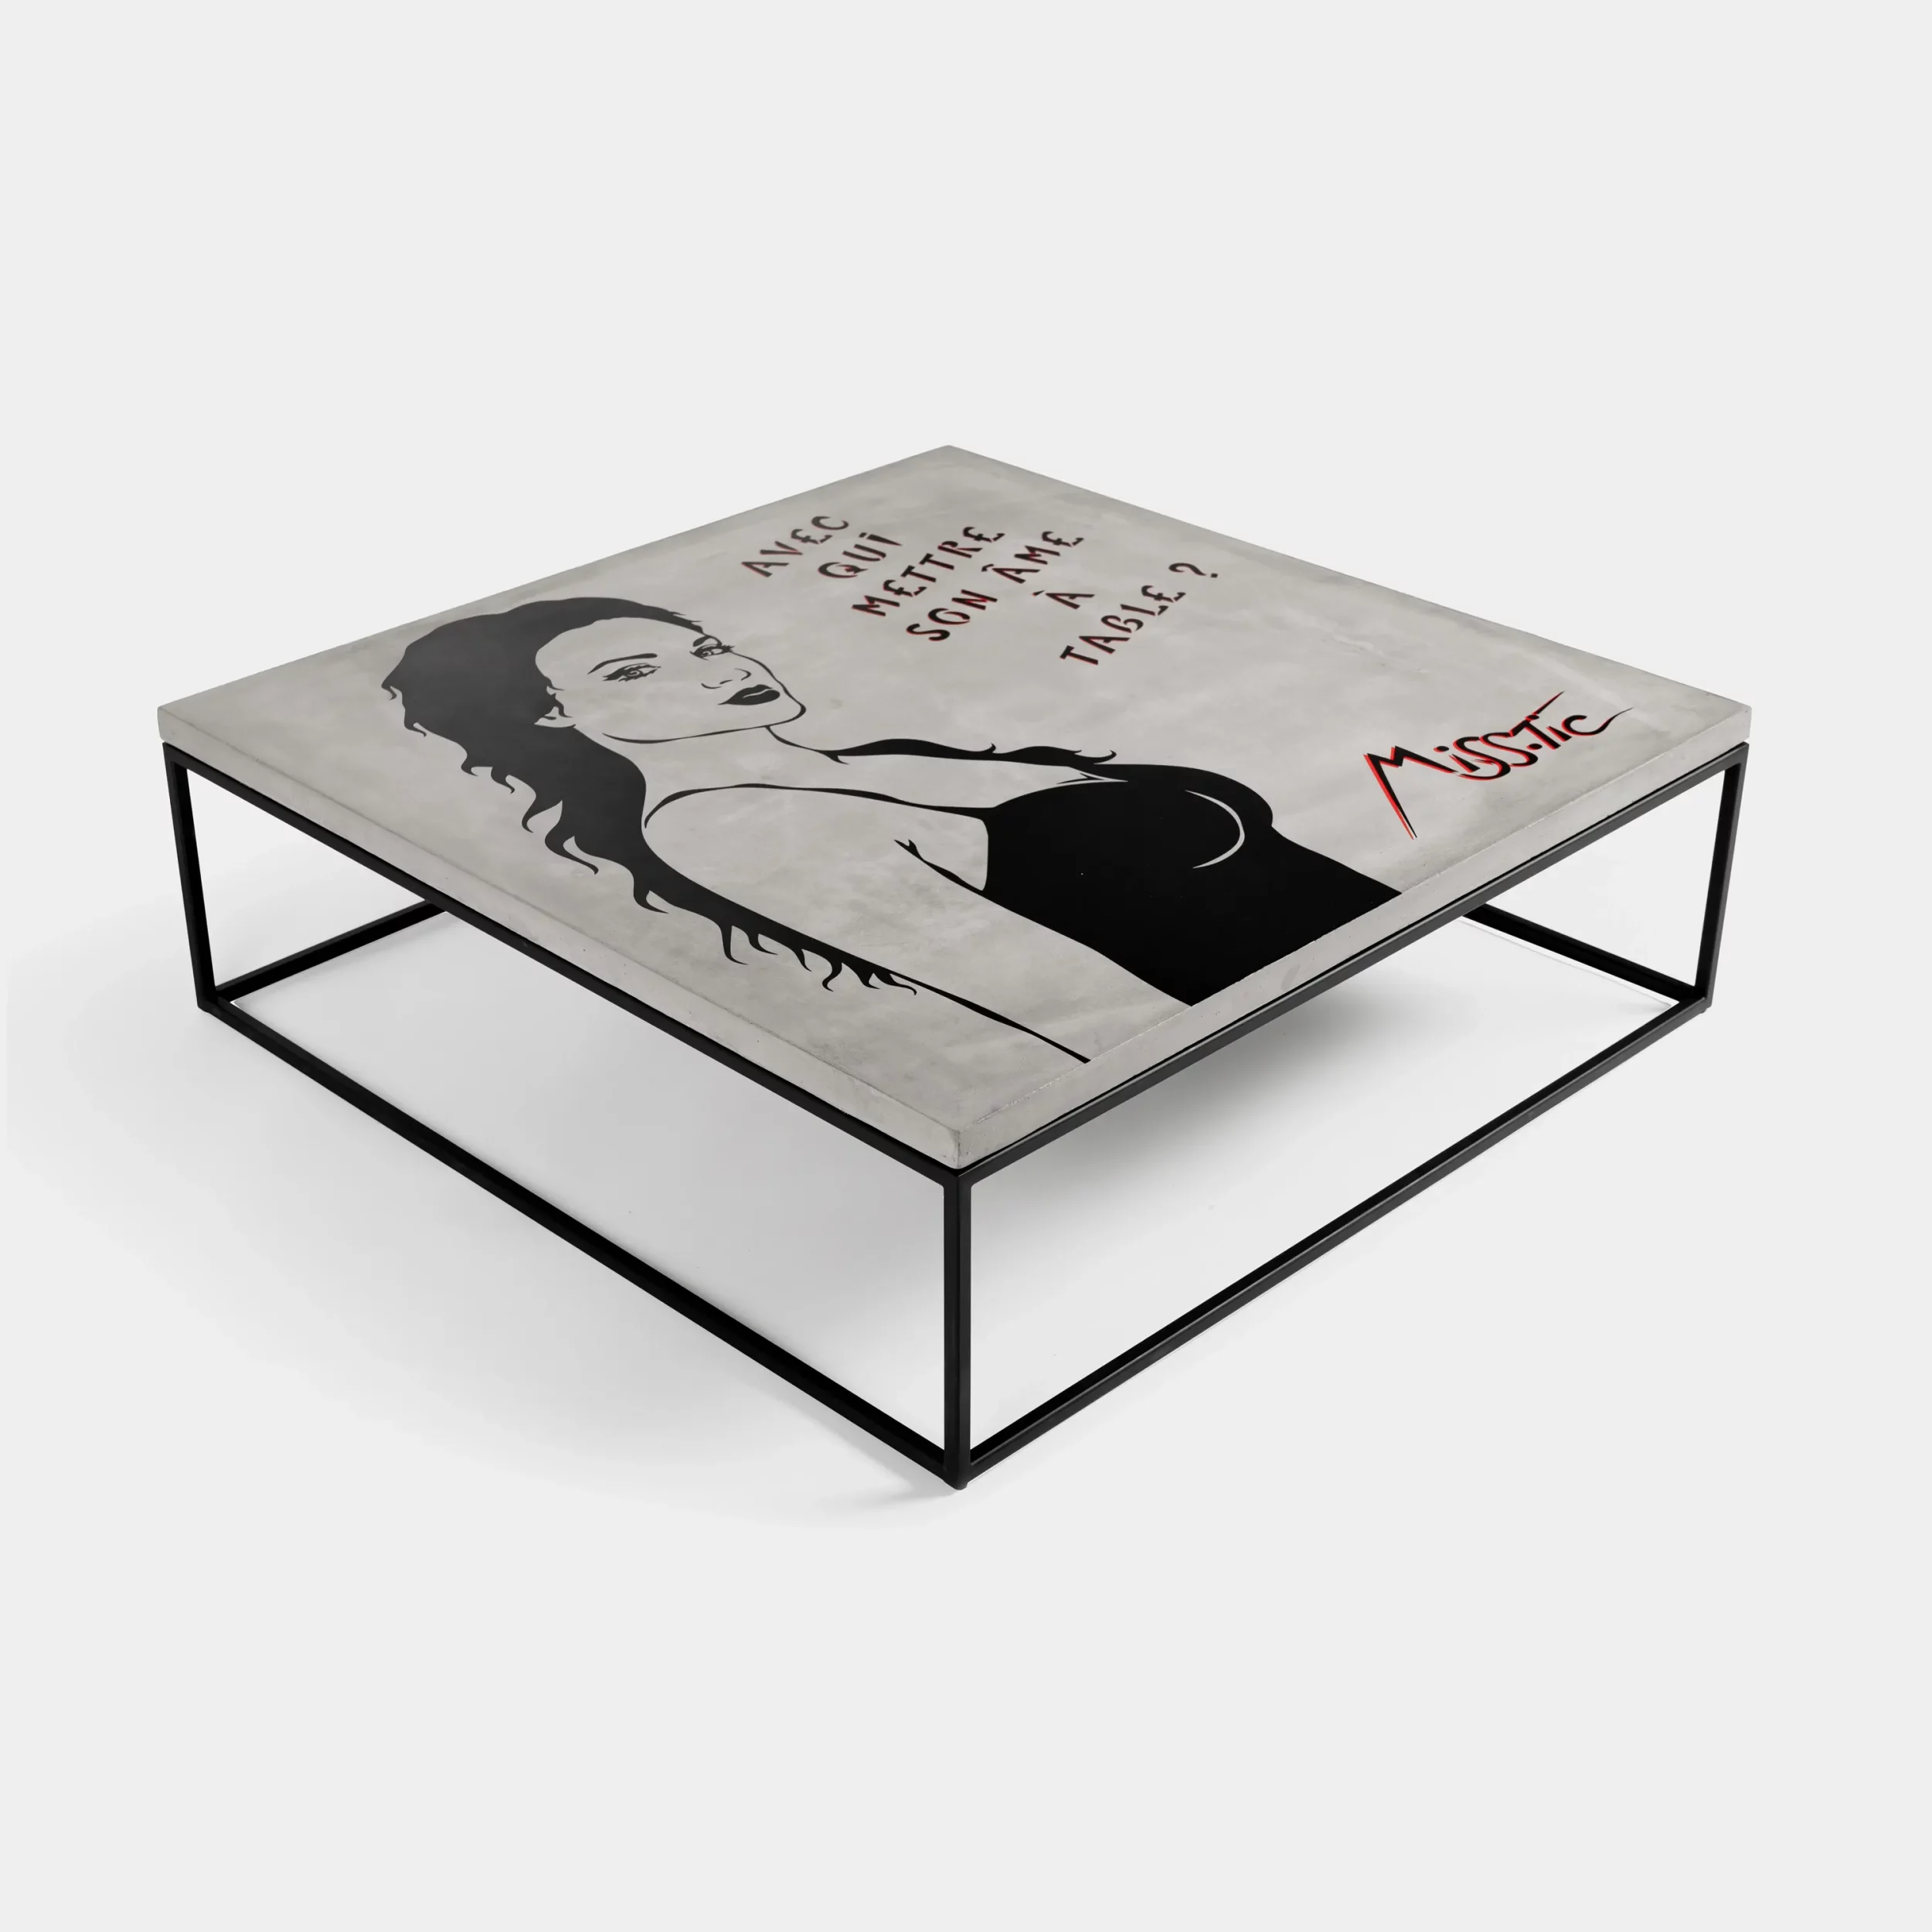 Miss.Tic limited edition concrete coffee table